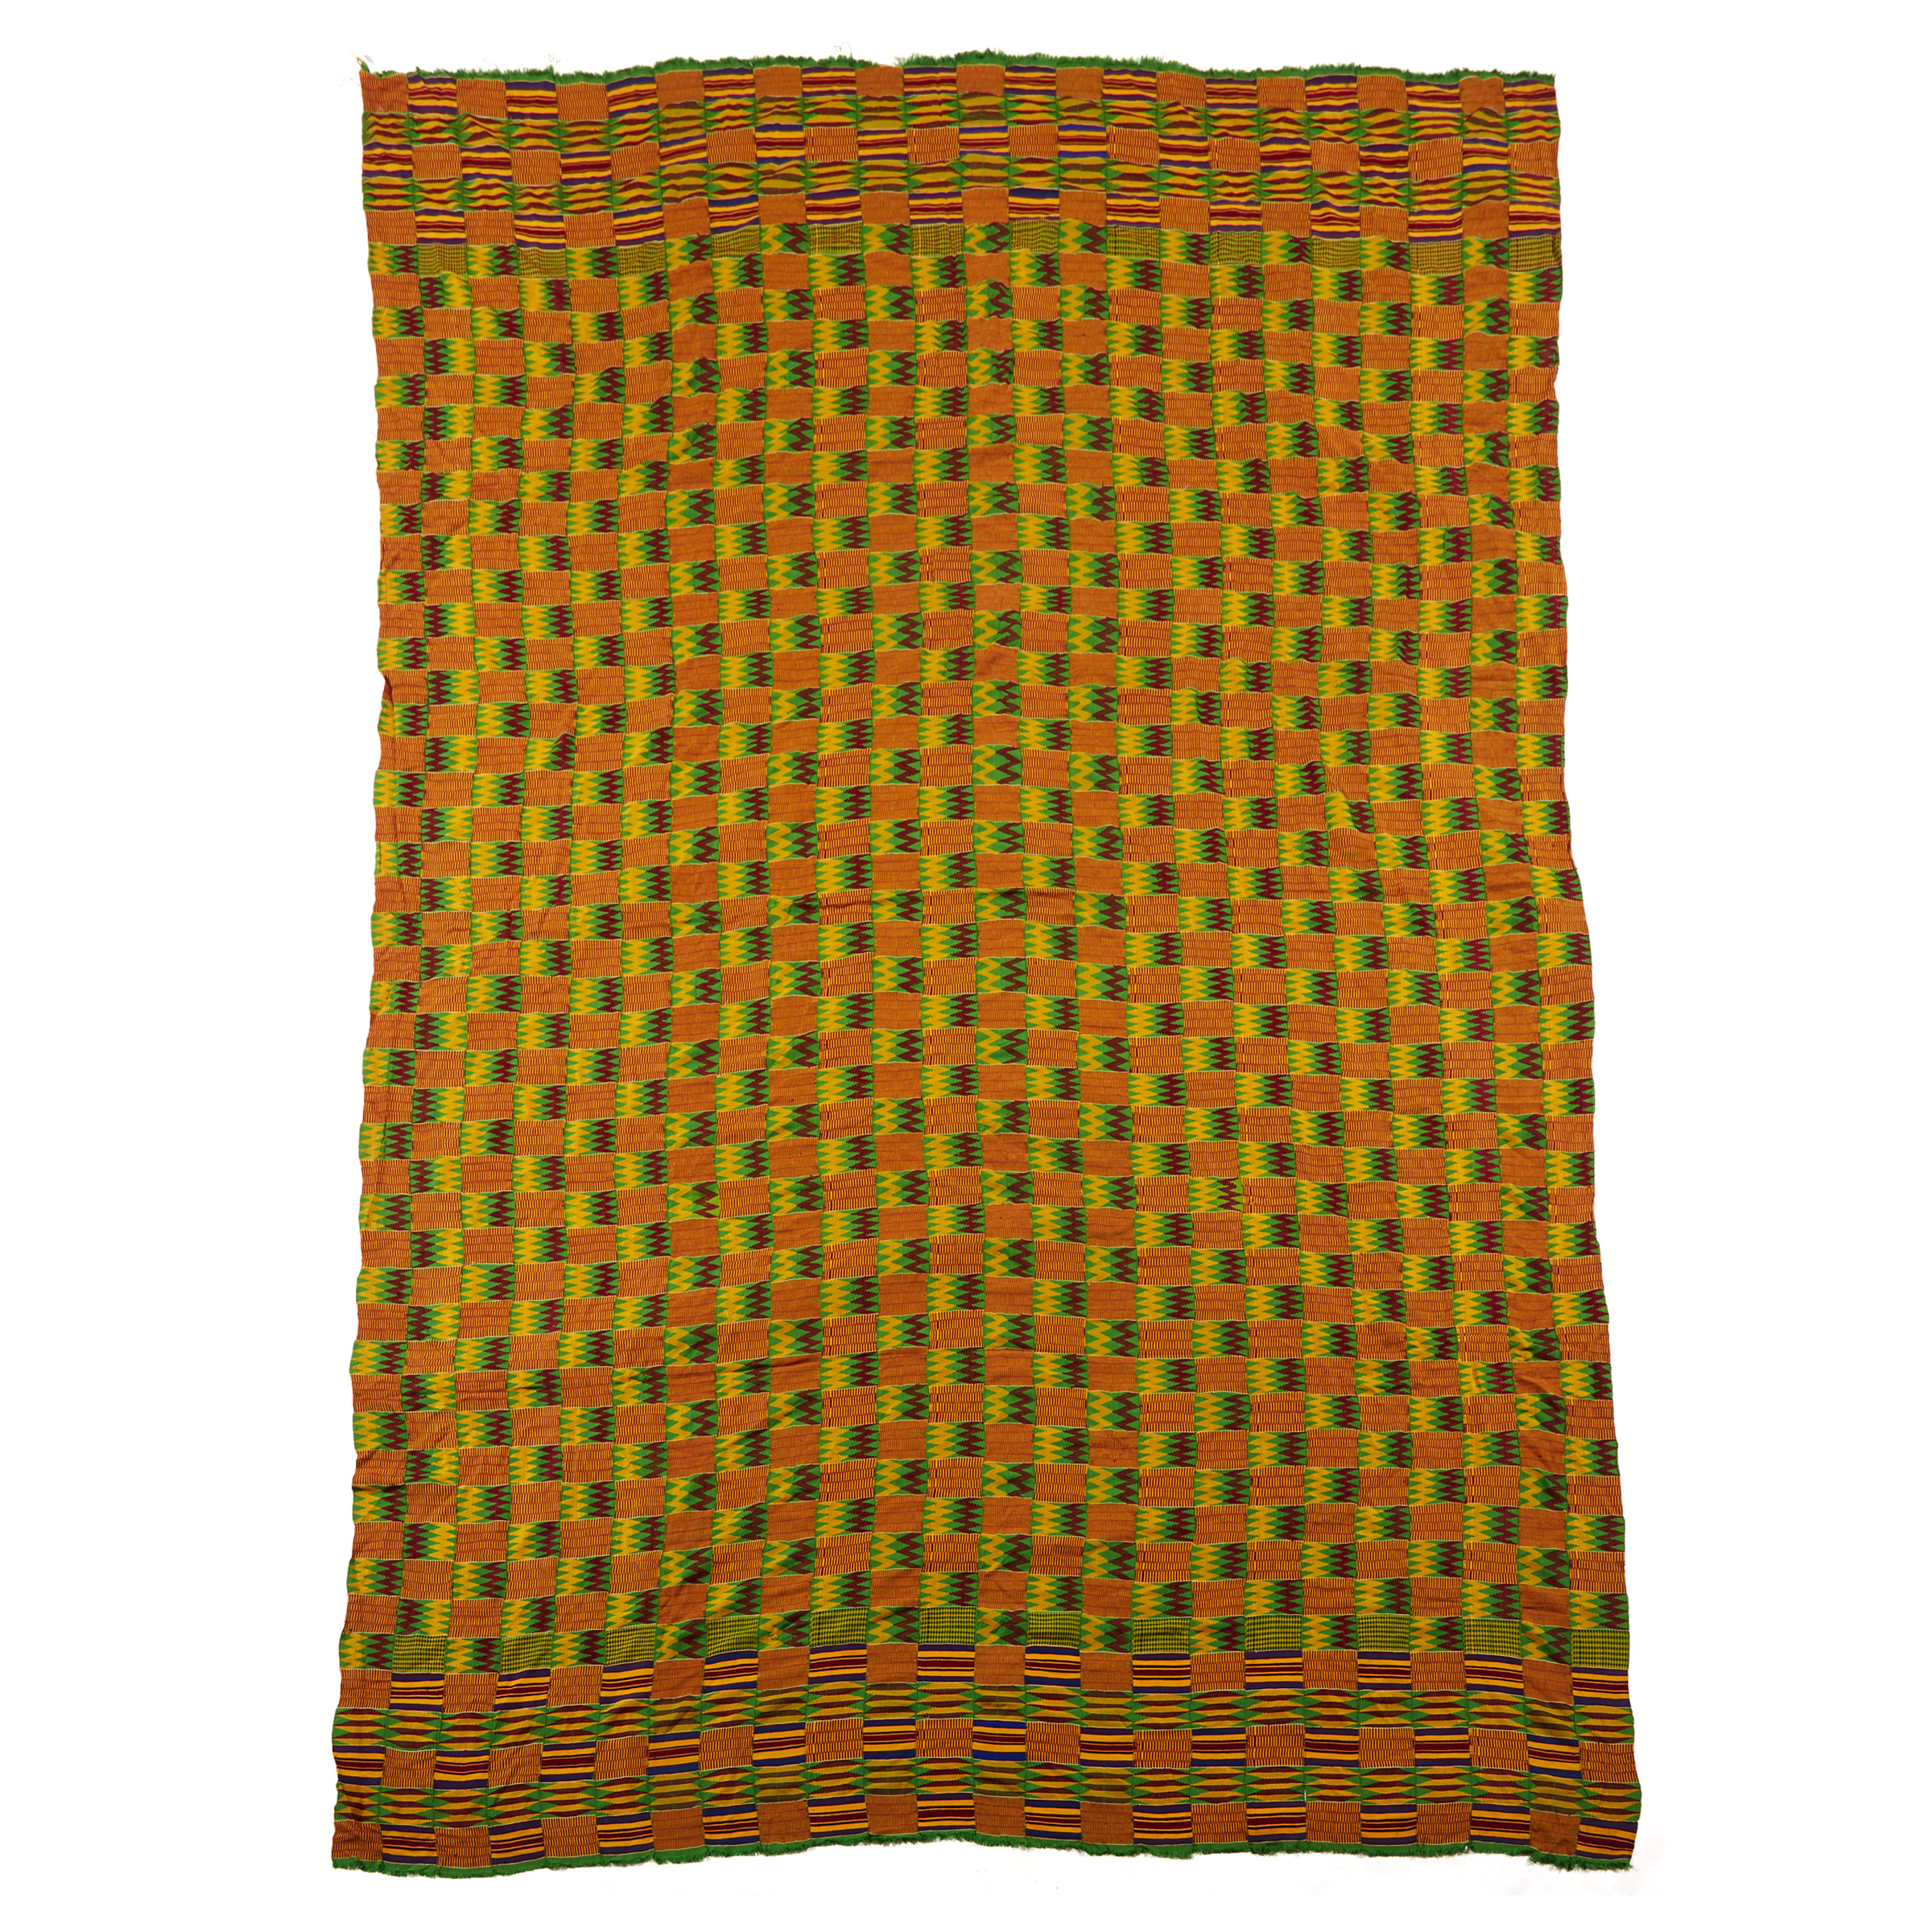 Akan Kente Cloth, Ghana, West Africa, mid to late 20th century